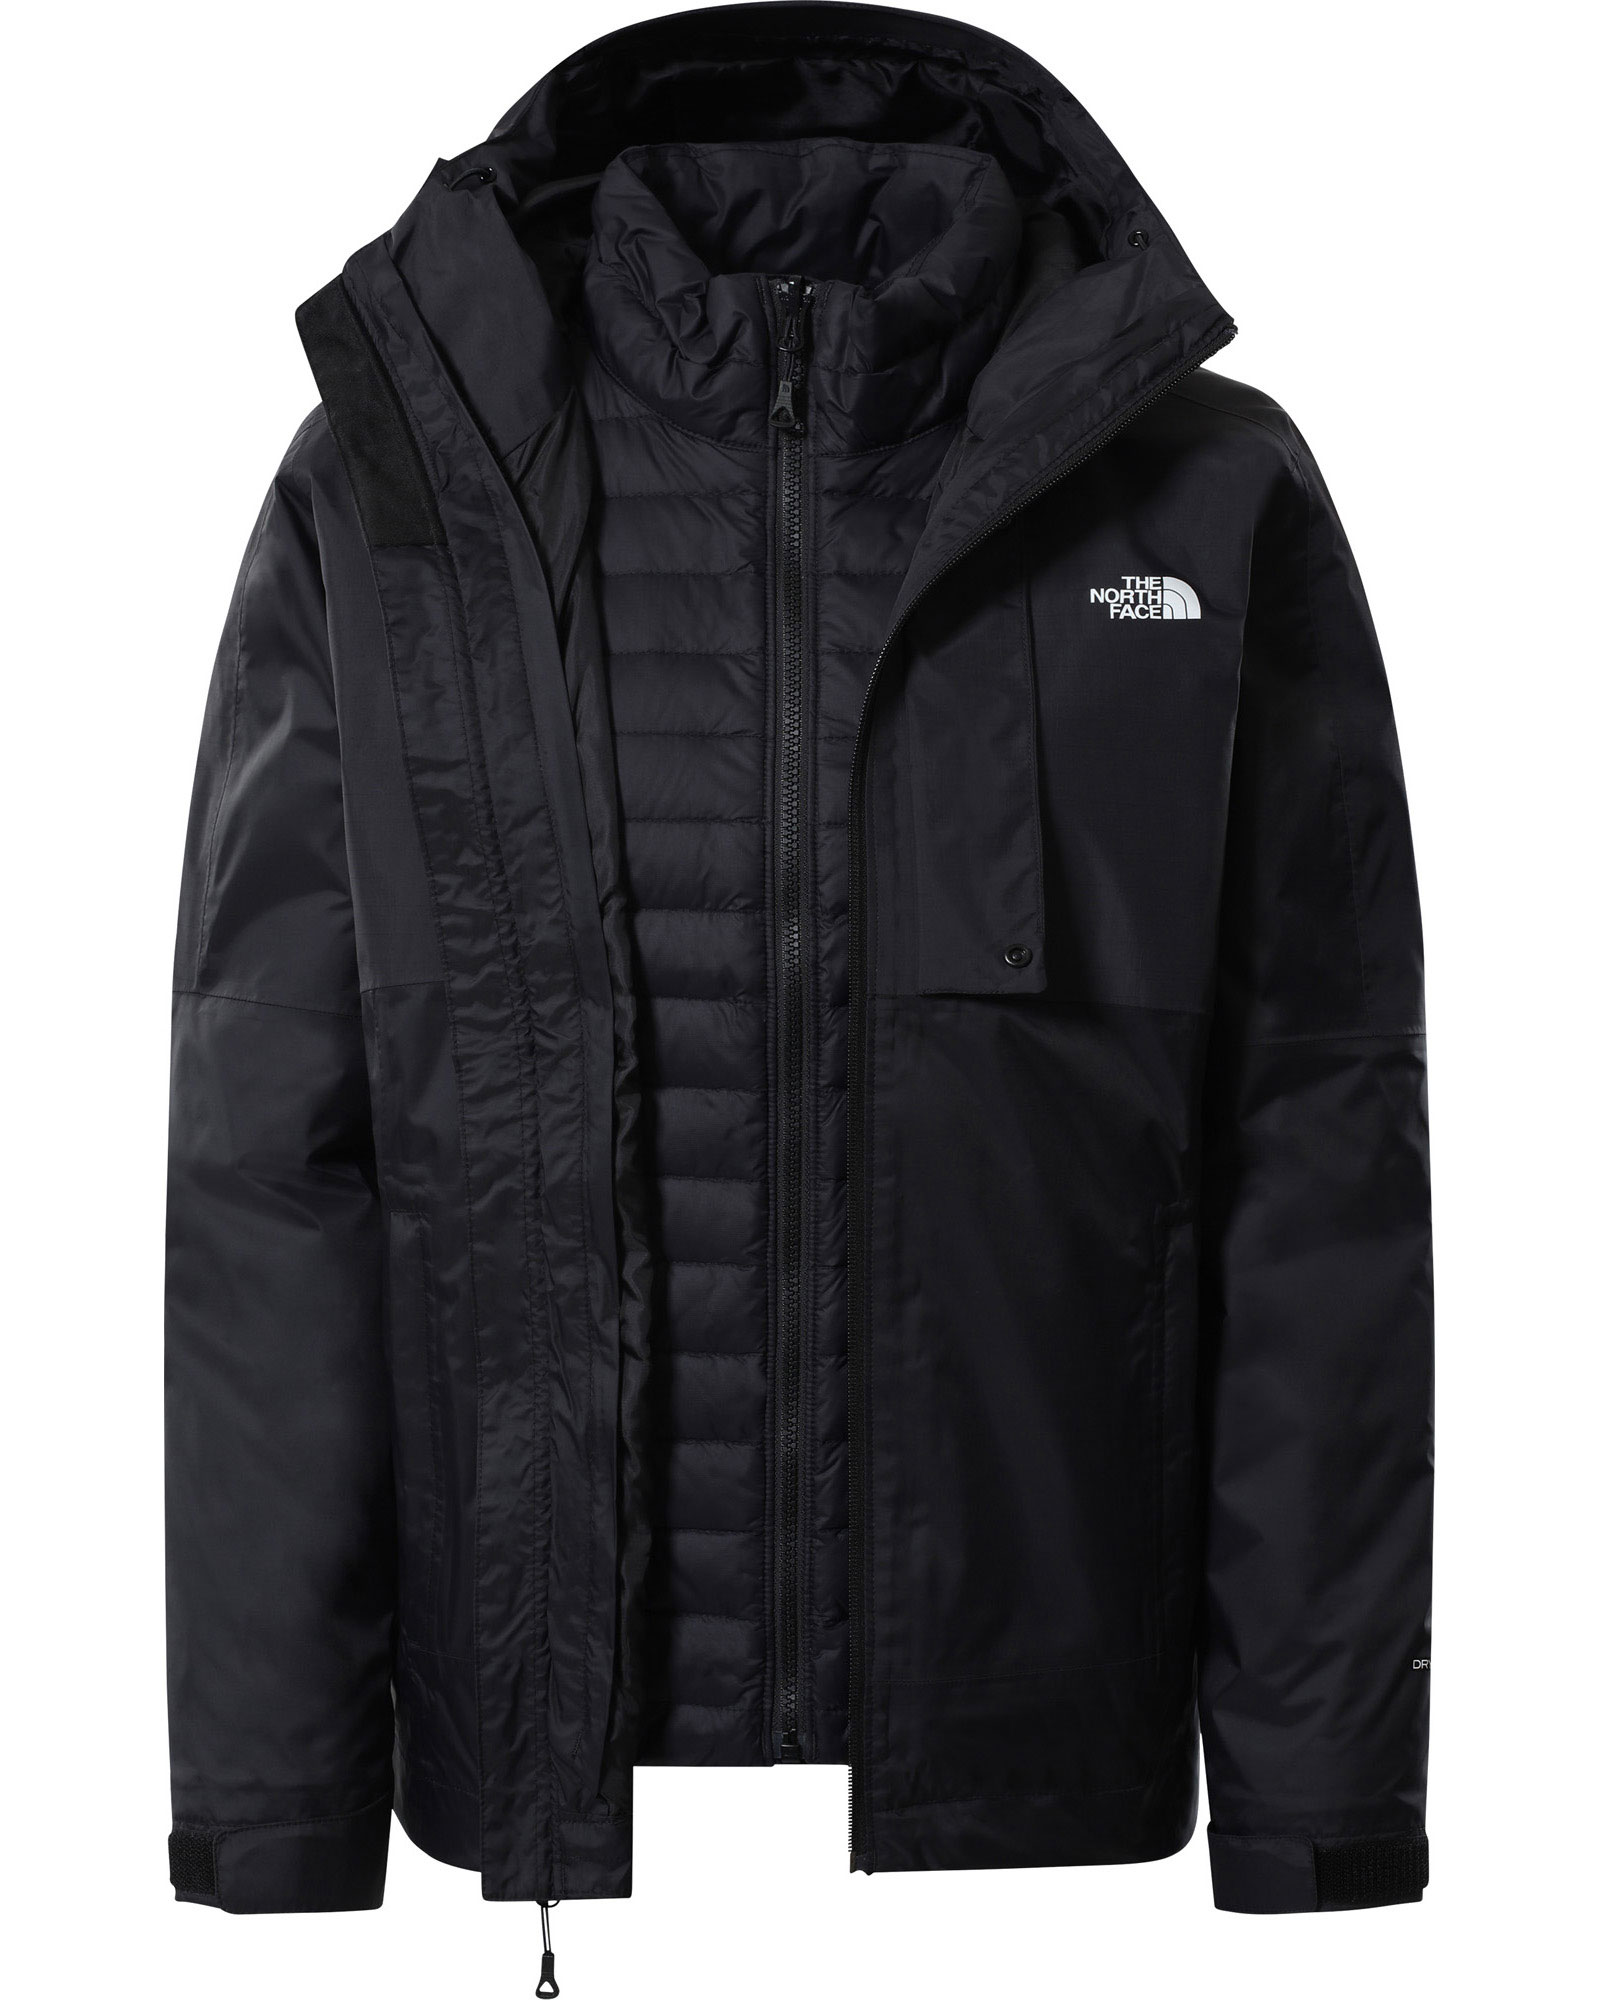 The North Face Down Insulated Triclimate Women’s Parka Jacket - TNF Black S